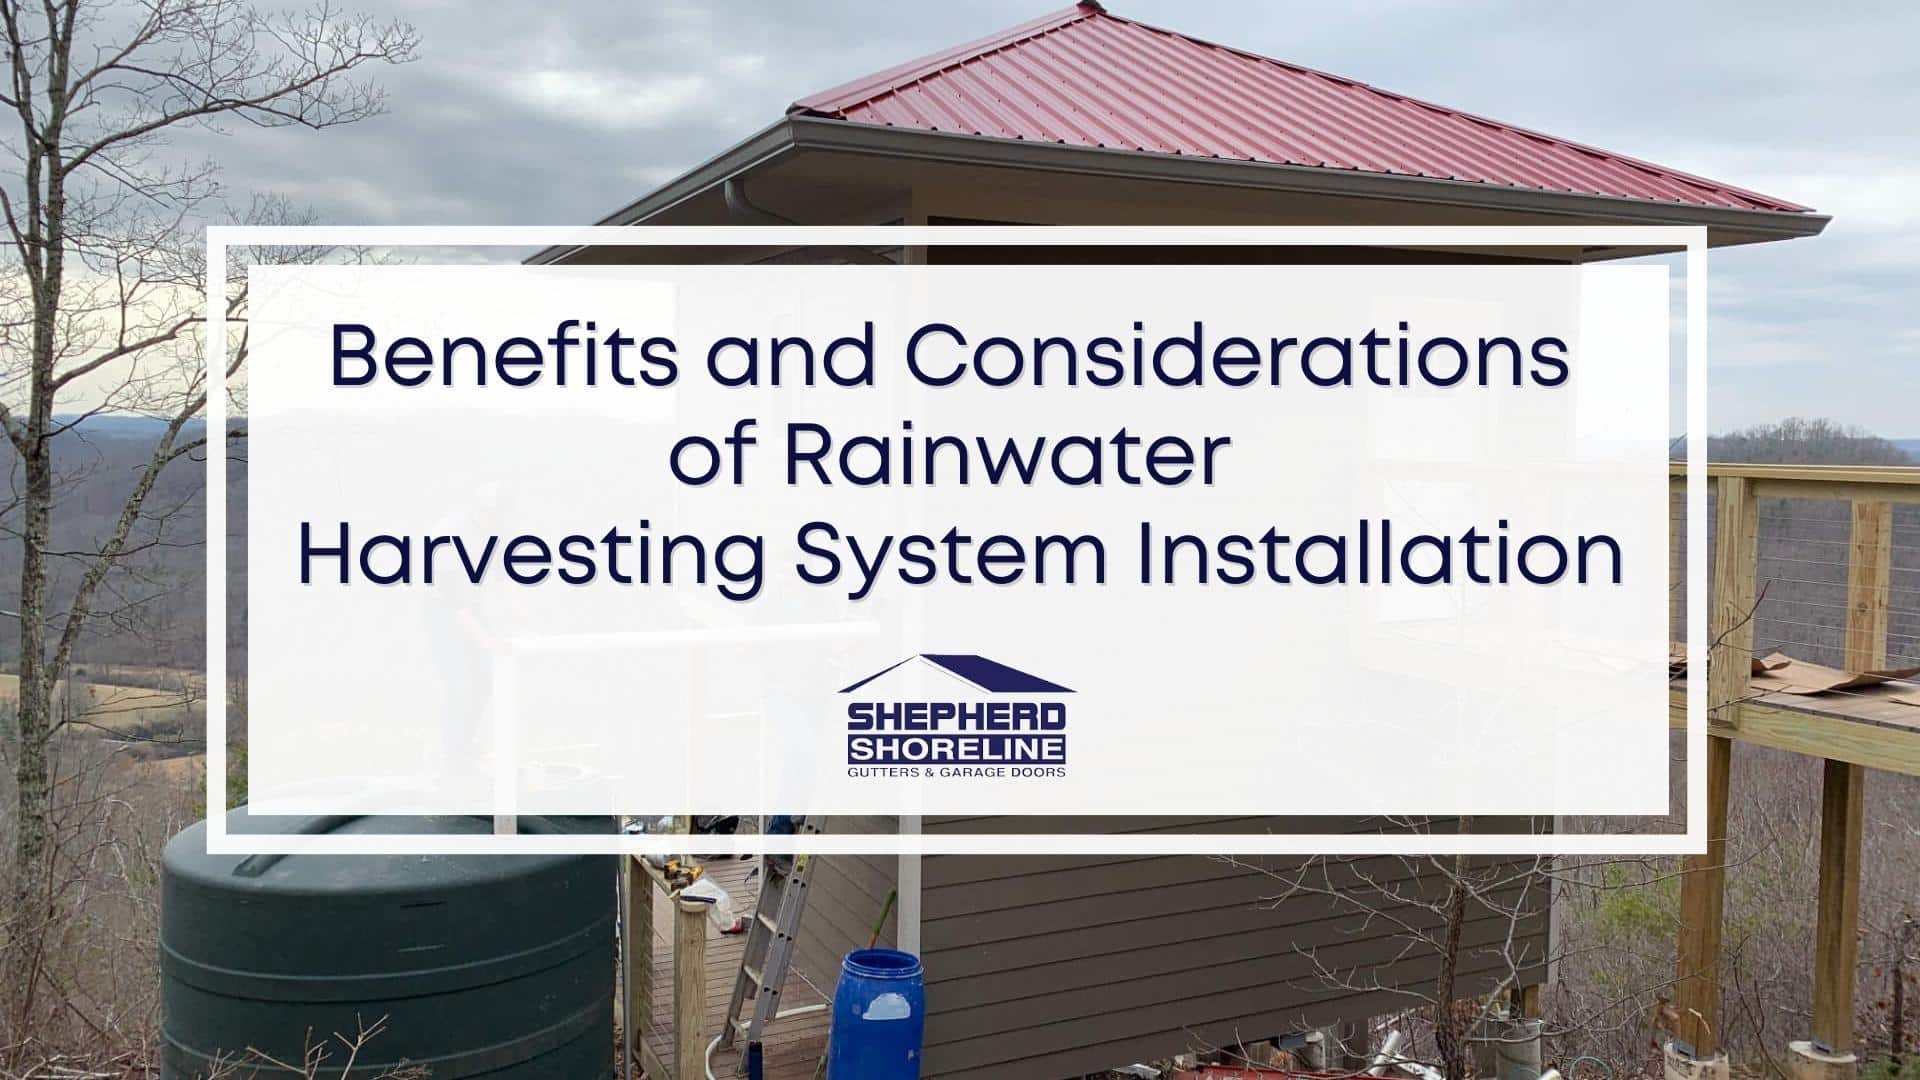 Featured image of benefits and considerations of rainwater harvesting system installation